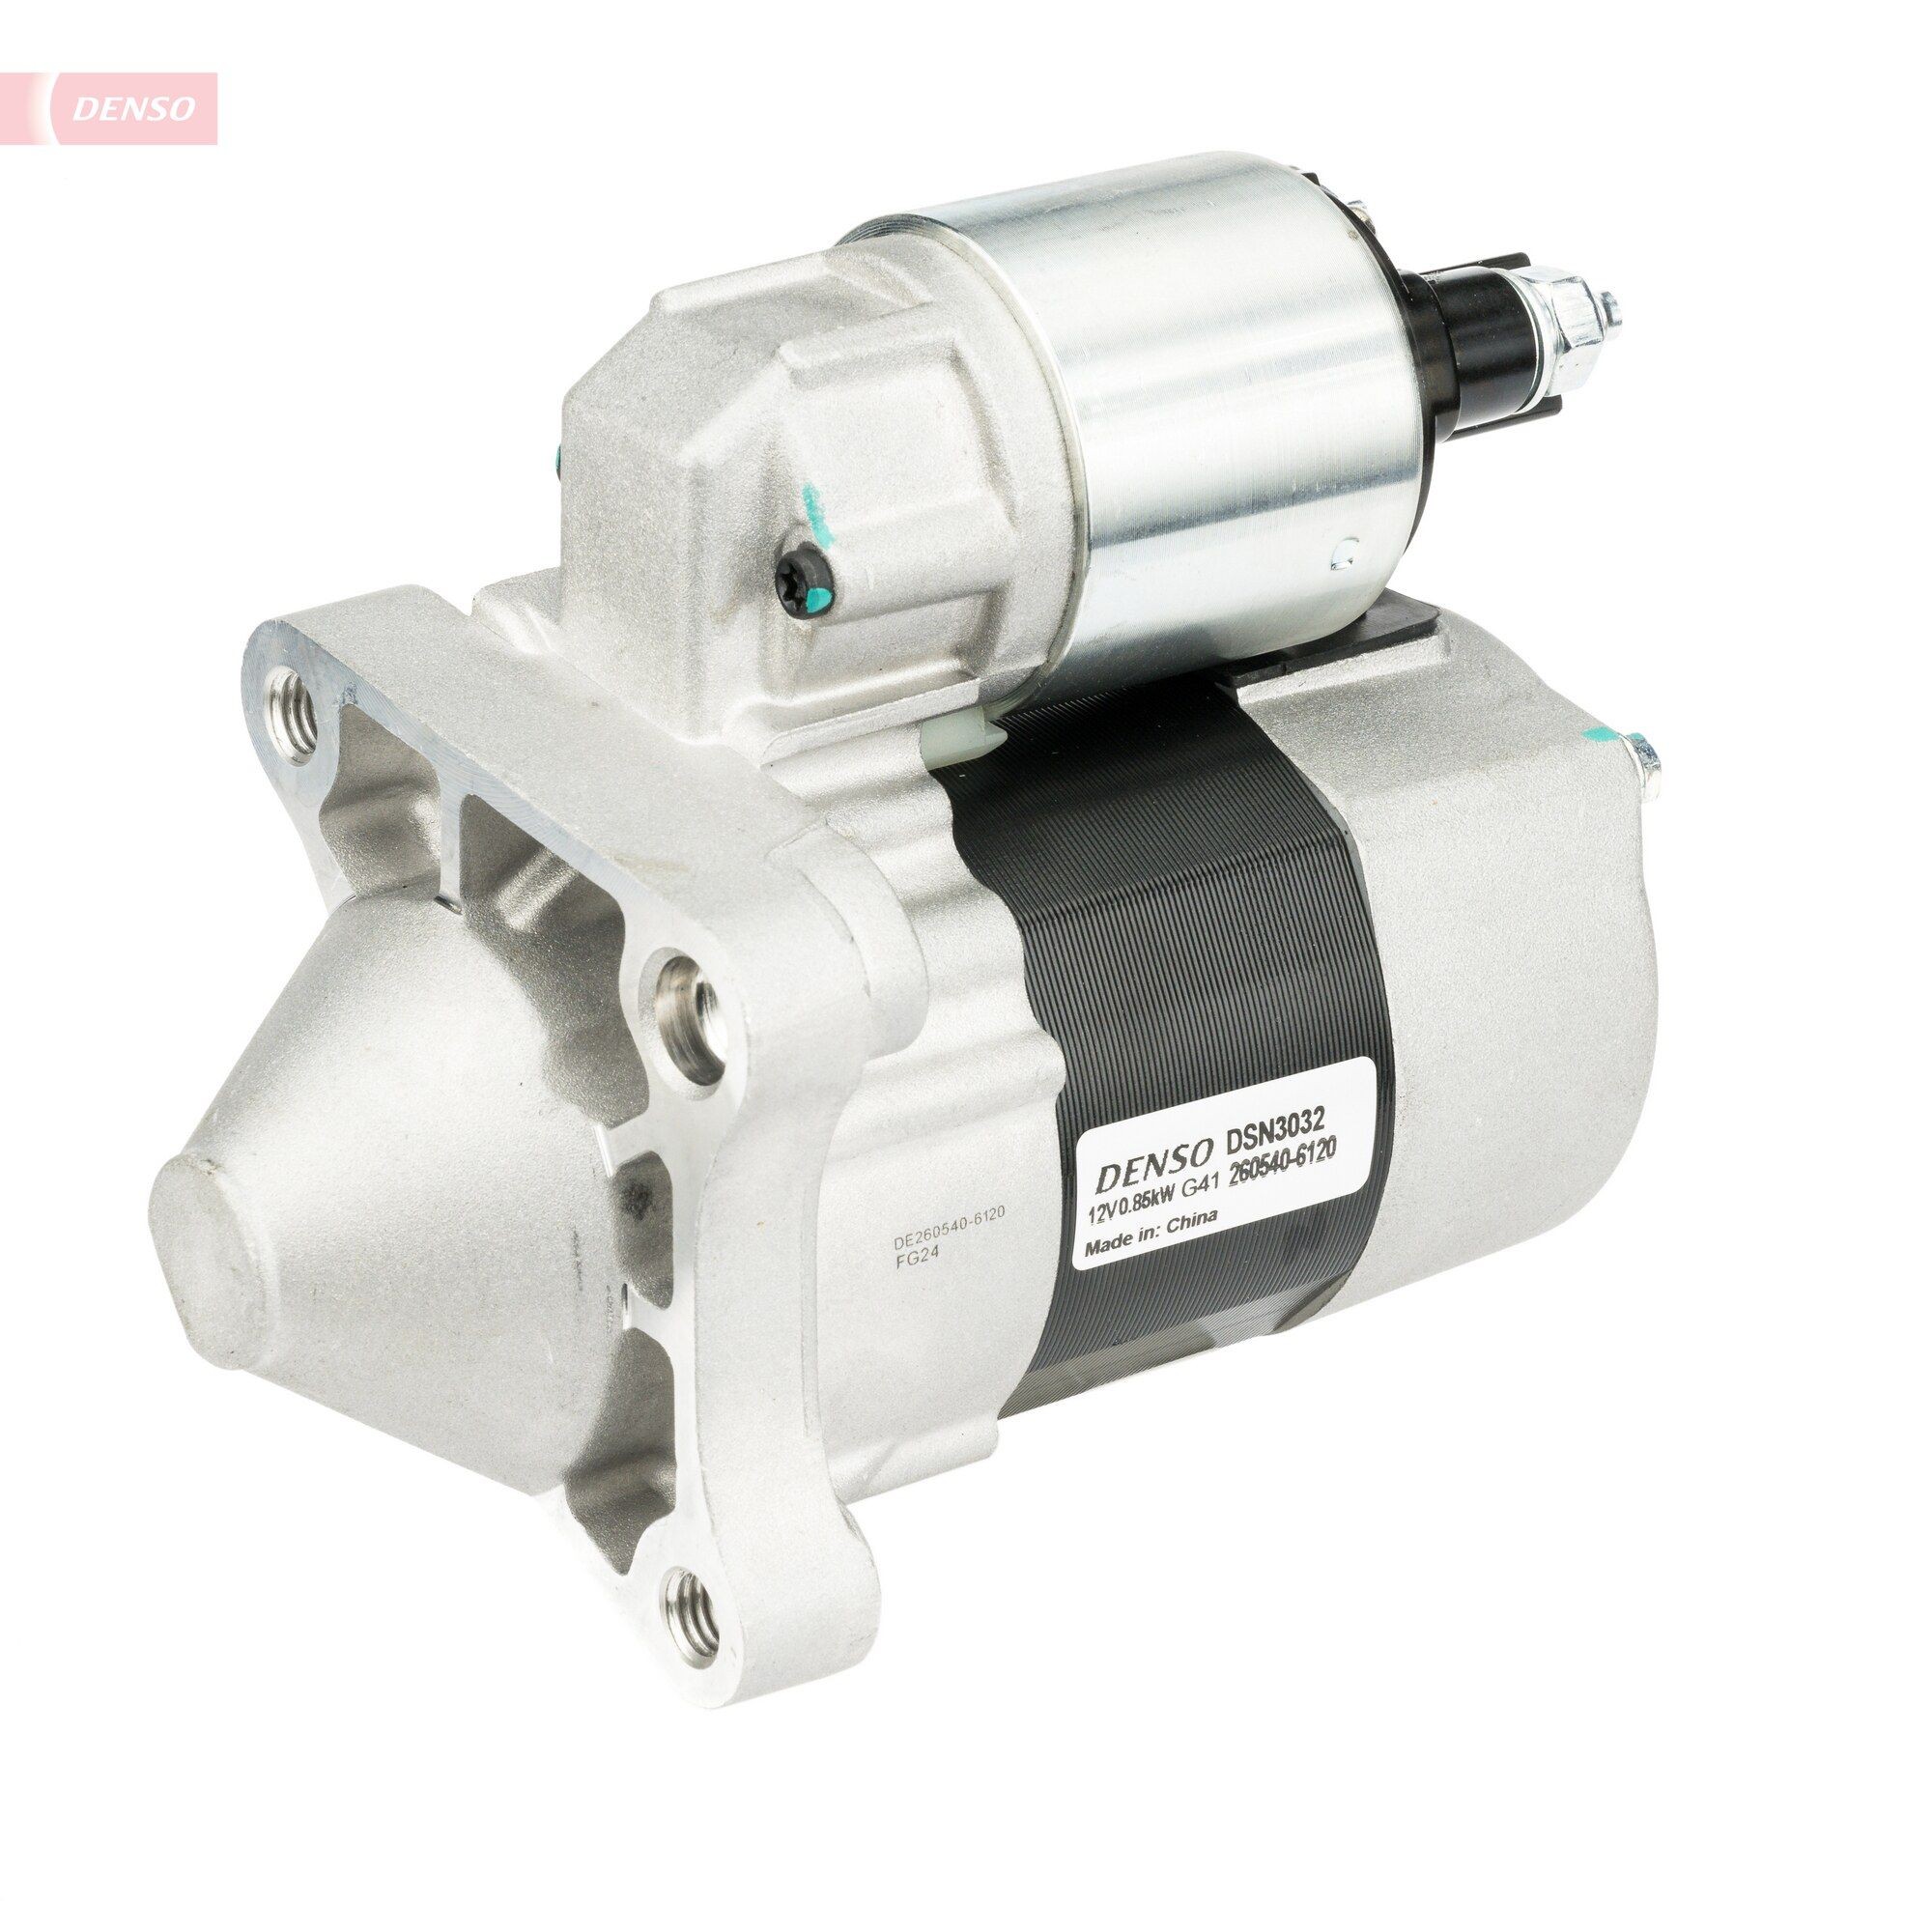 DENSO DSN3032 Starter motor NISSAN experience and price